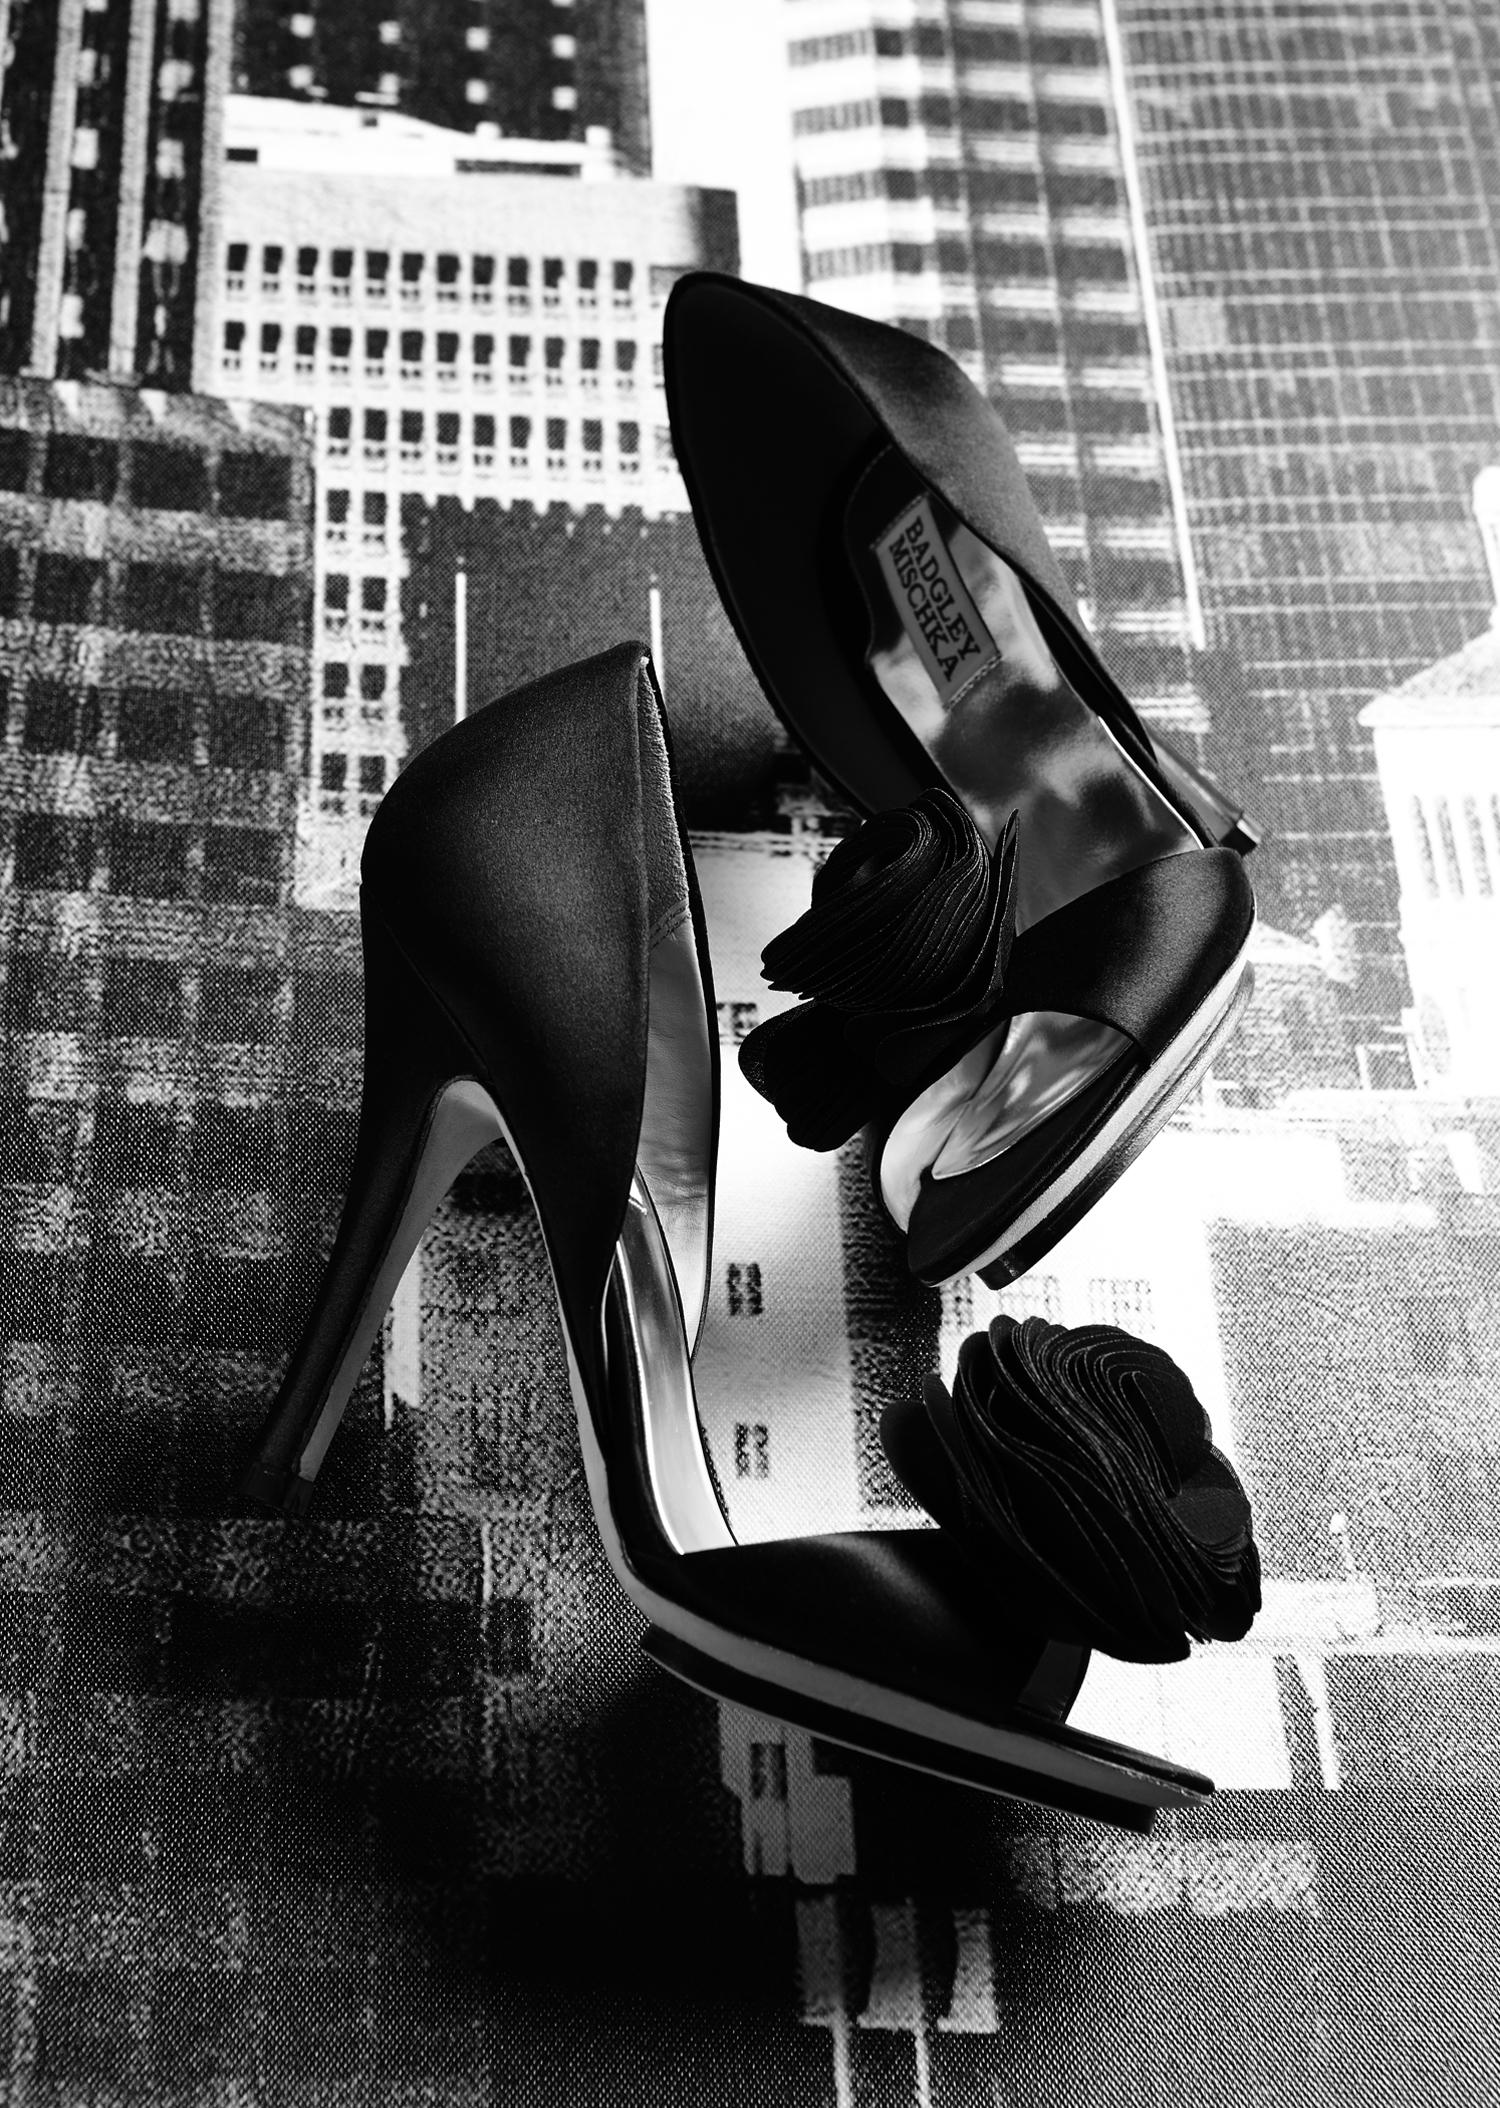 shoes b and w.jpg